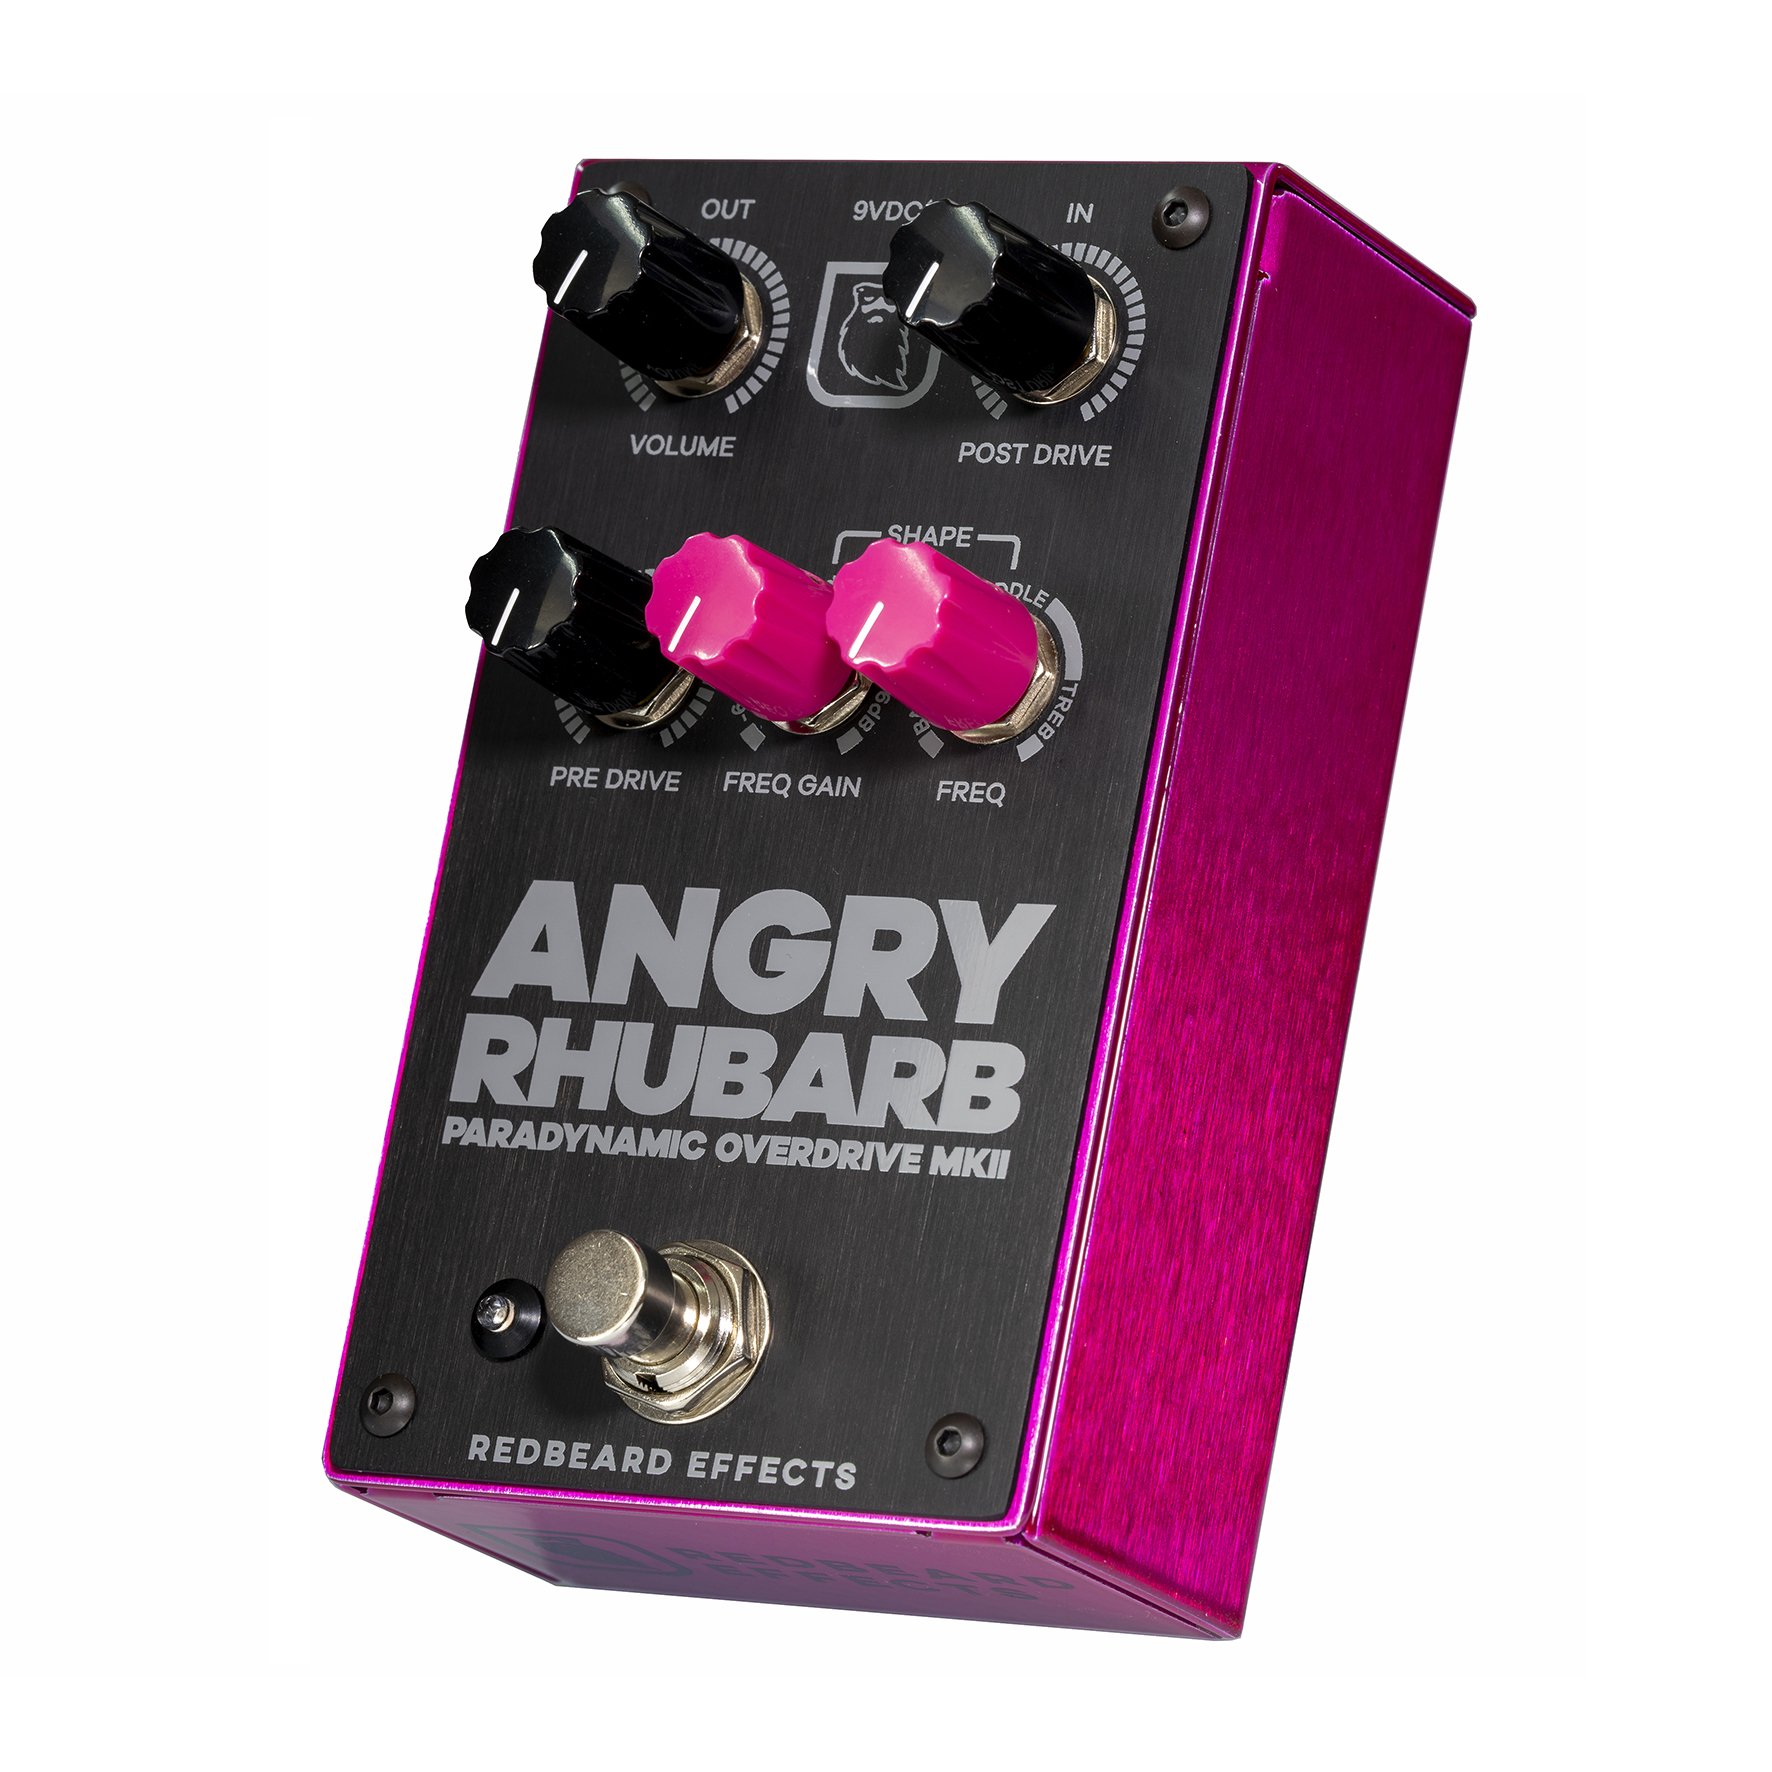 Redbeard Effects Angry Rhubarb Paradynamic Overdrive Mkii - PÉdale Overdrive / Distortion / Fuzz - Variation 1